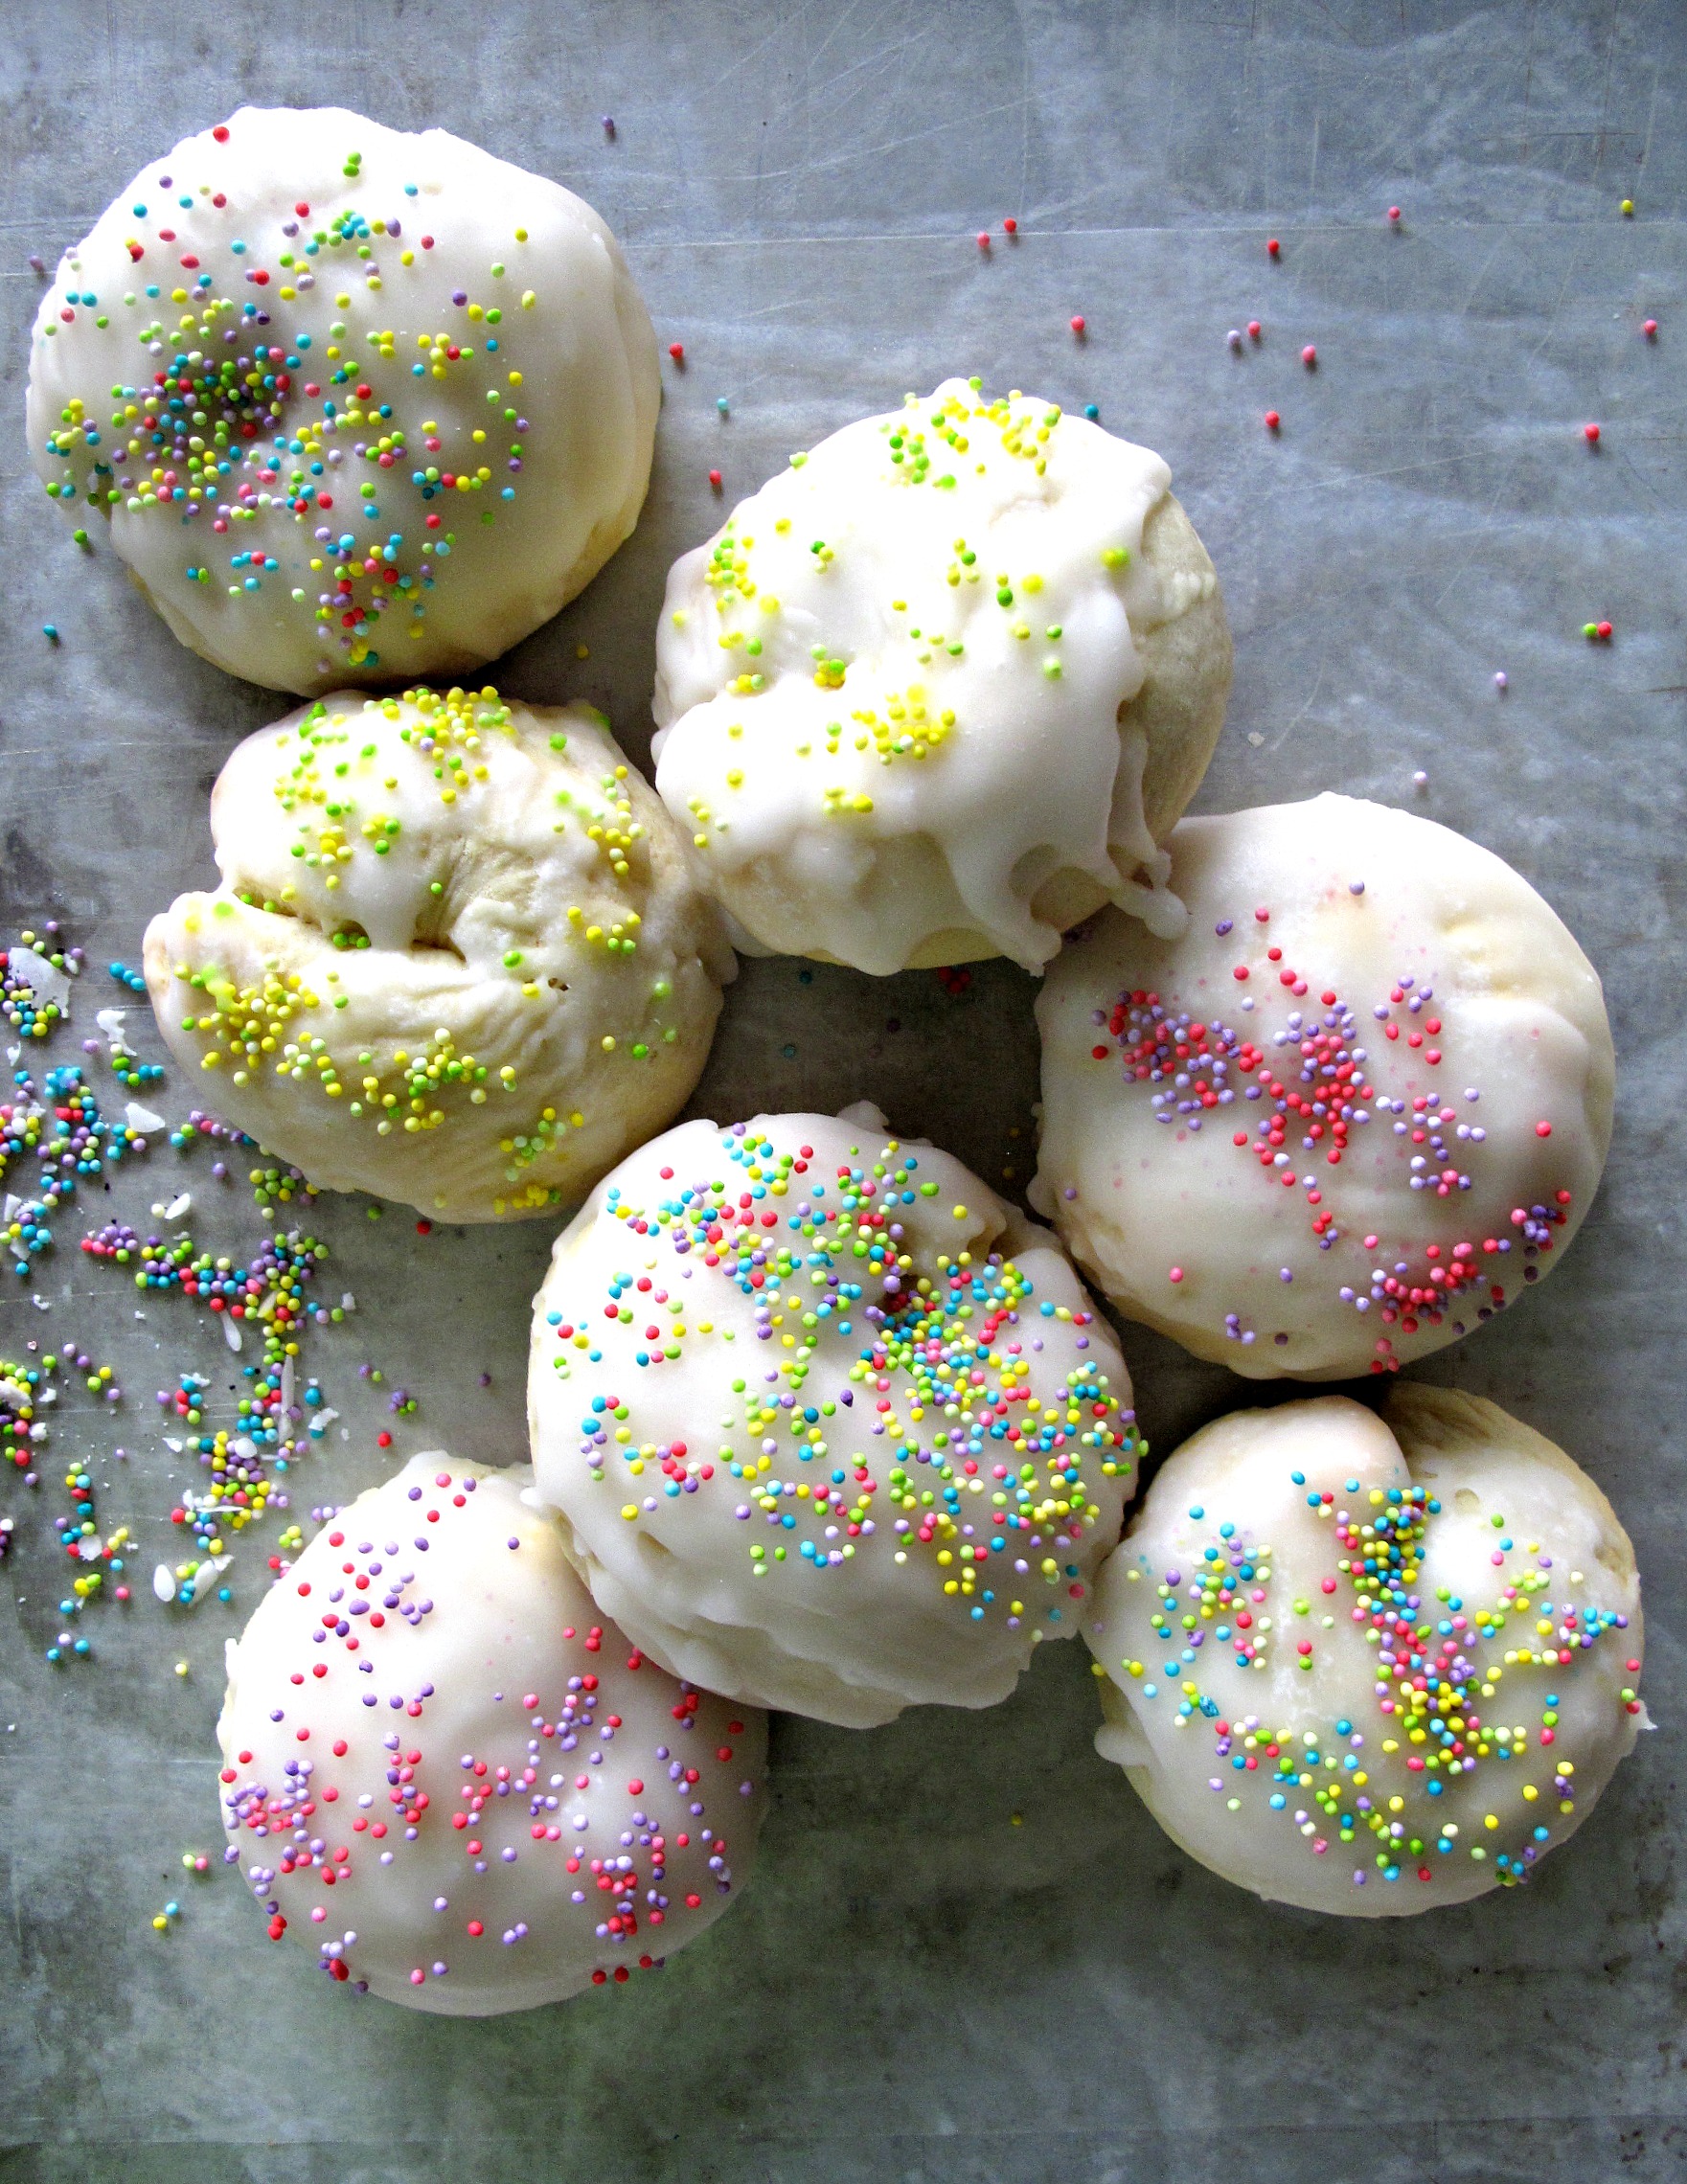 Italian Easter Cookies (Taralli Dolce Di Pasqua), puffy, round dough balls iced in crisp white icing with pastel nonpareil sprinkles.